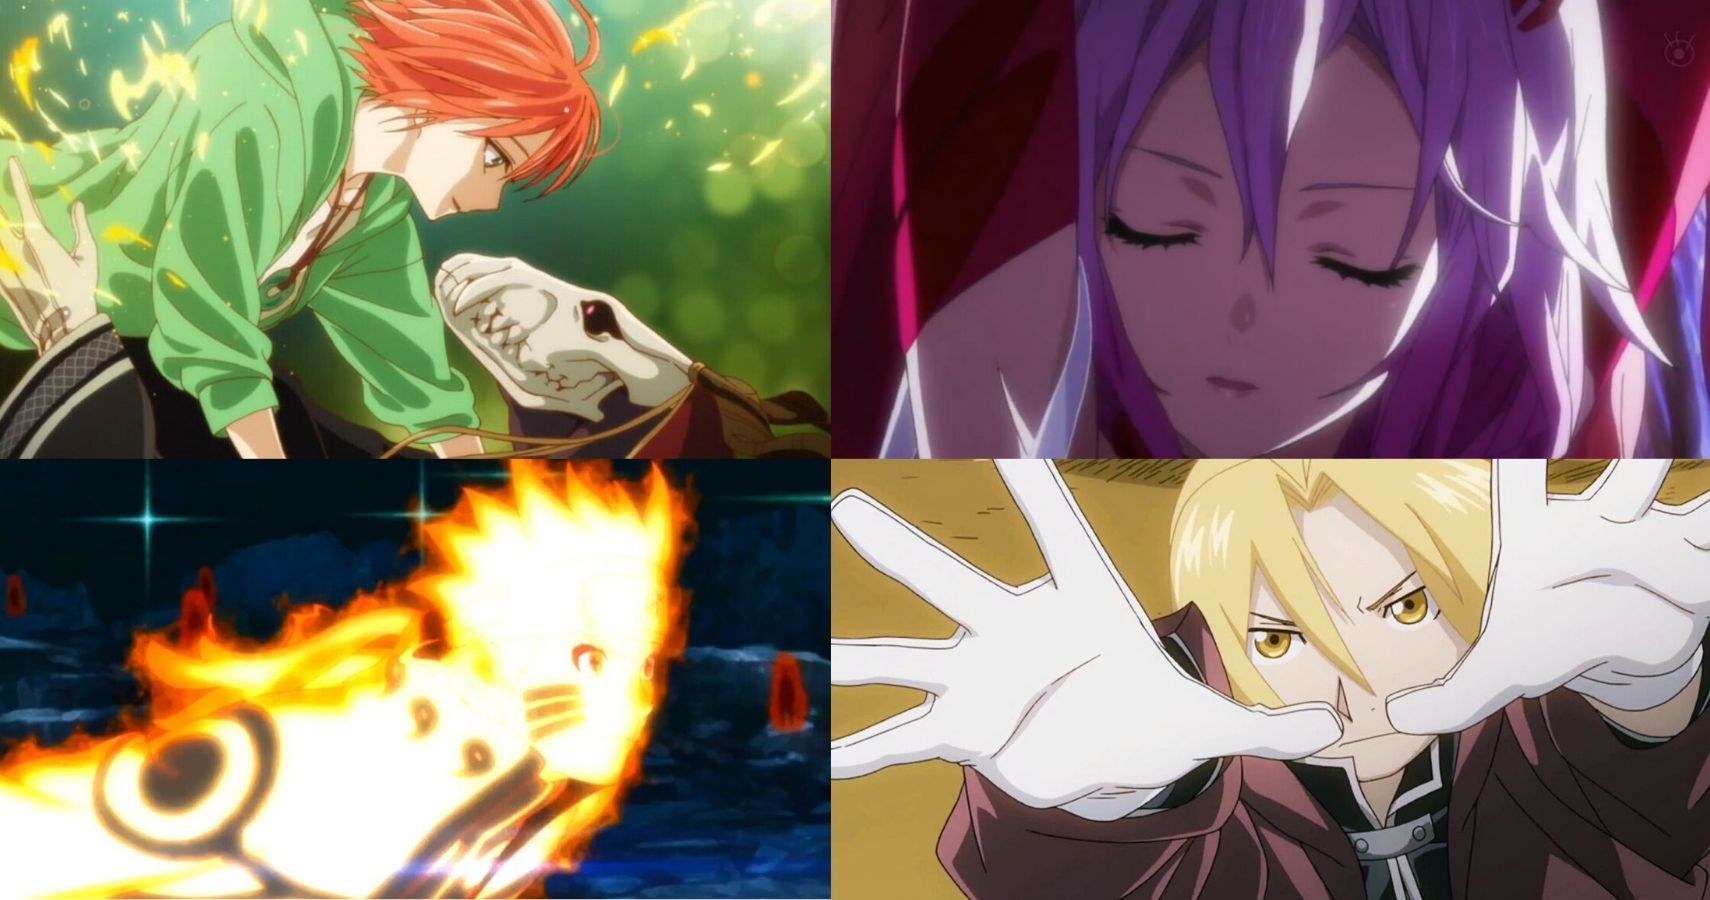 10 Anime Openings That Spoiled The Show's Ending